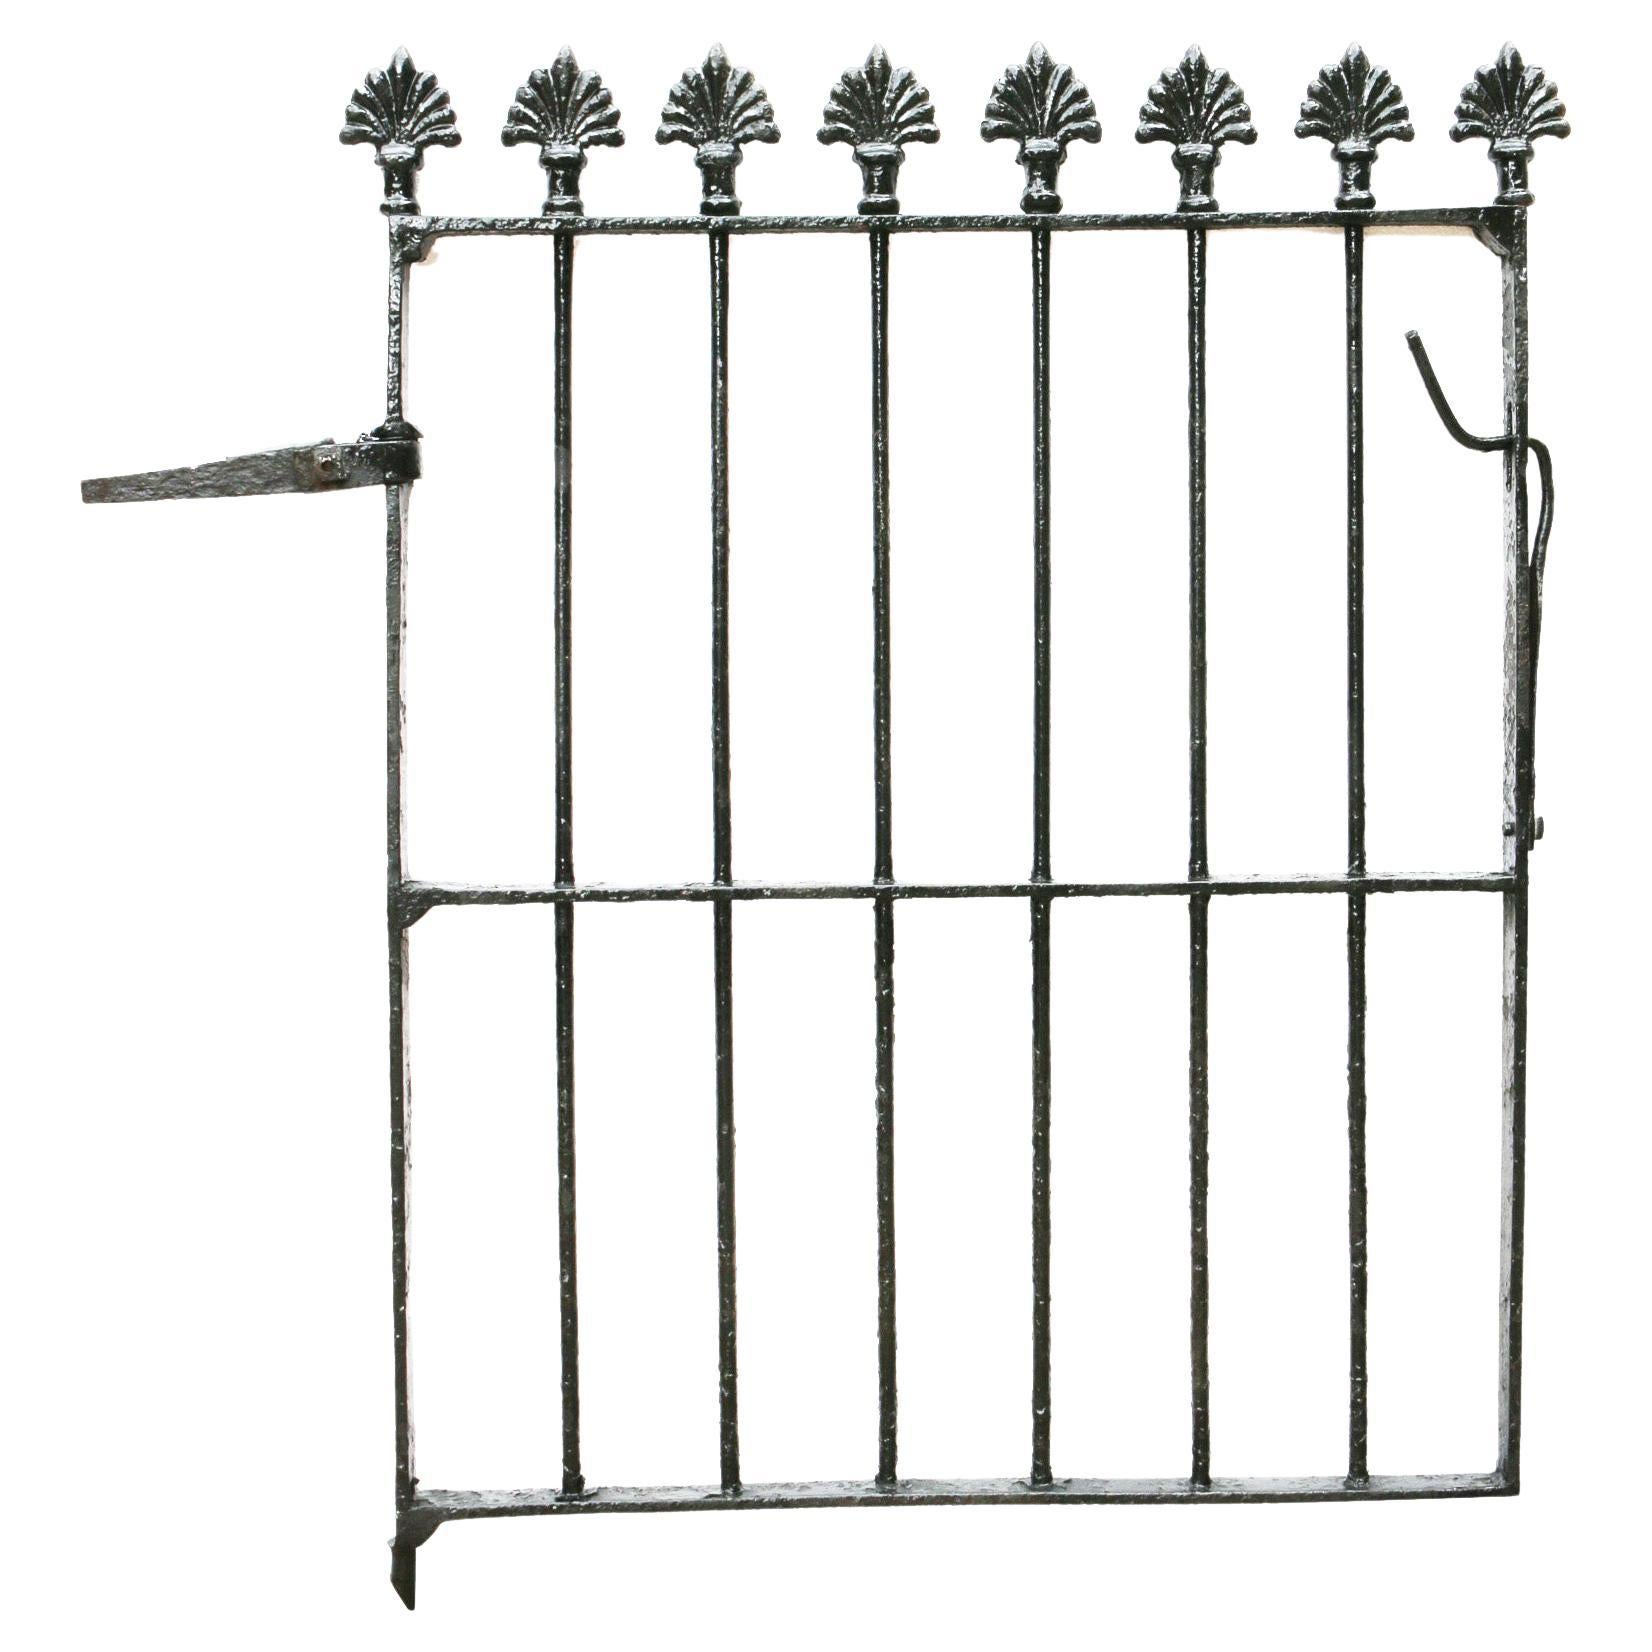 A Reclaimed Wrought Iron Garden Gate For Sale